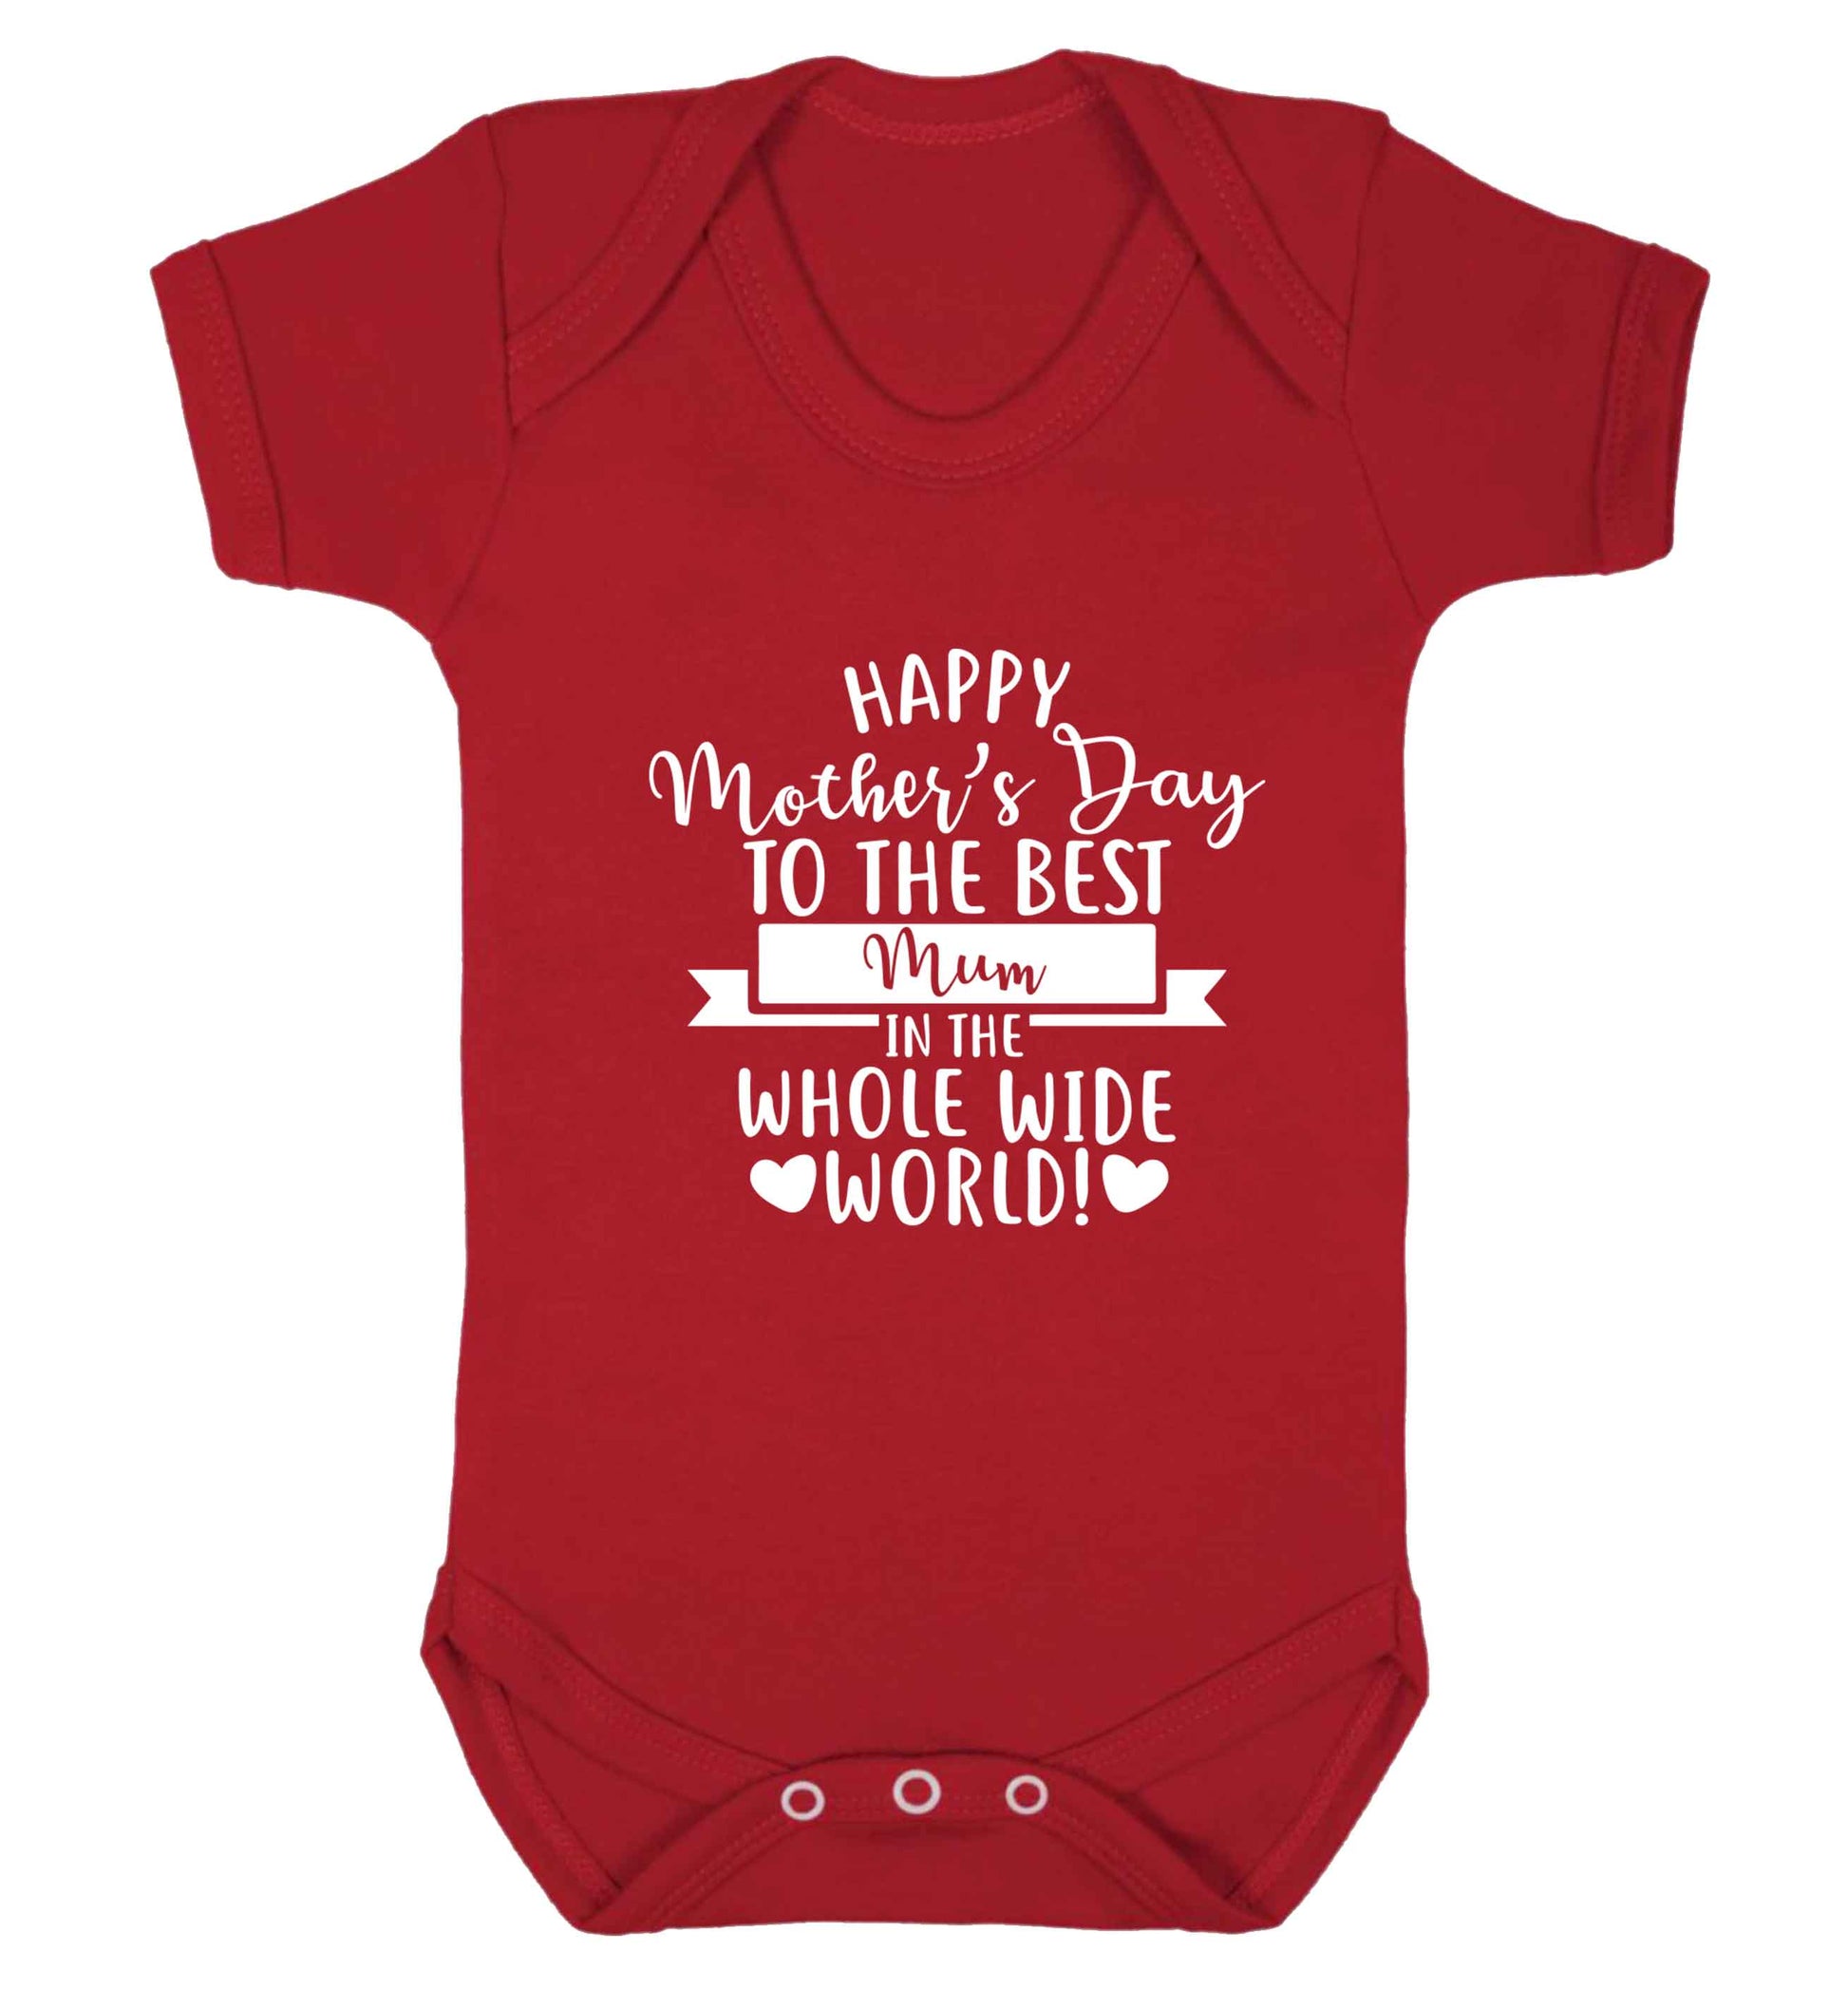 Happy mother's day to the best mum in the world baby vest red 18-24 months